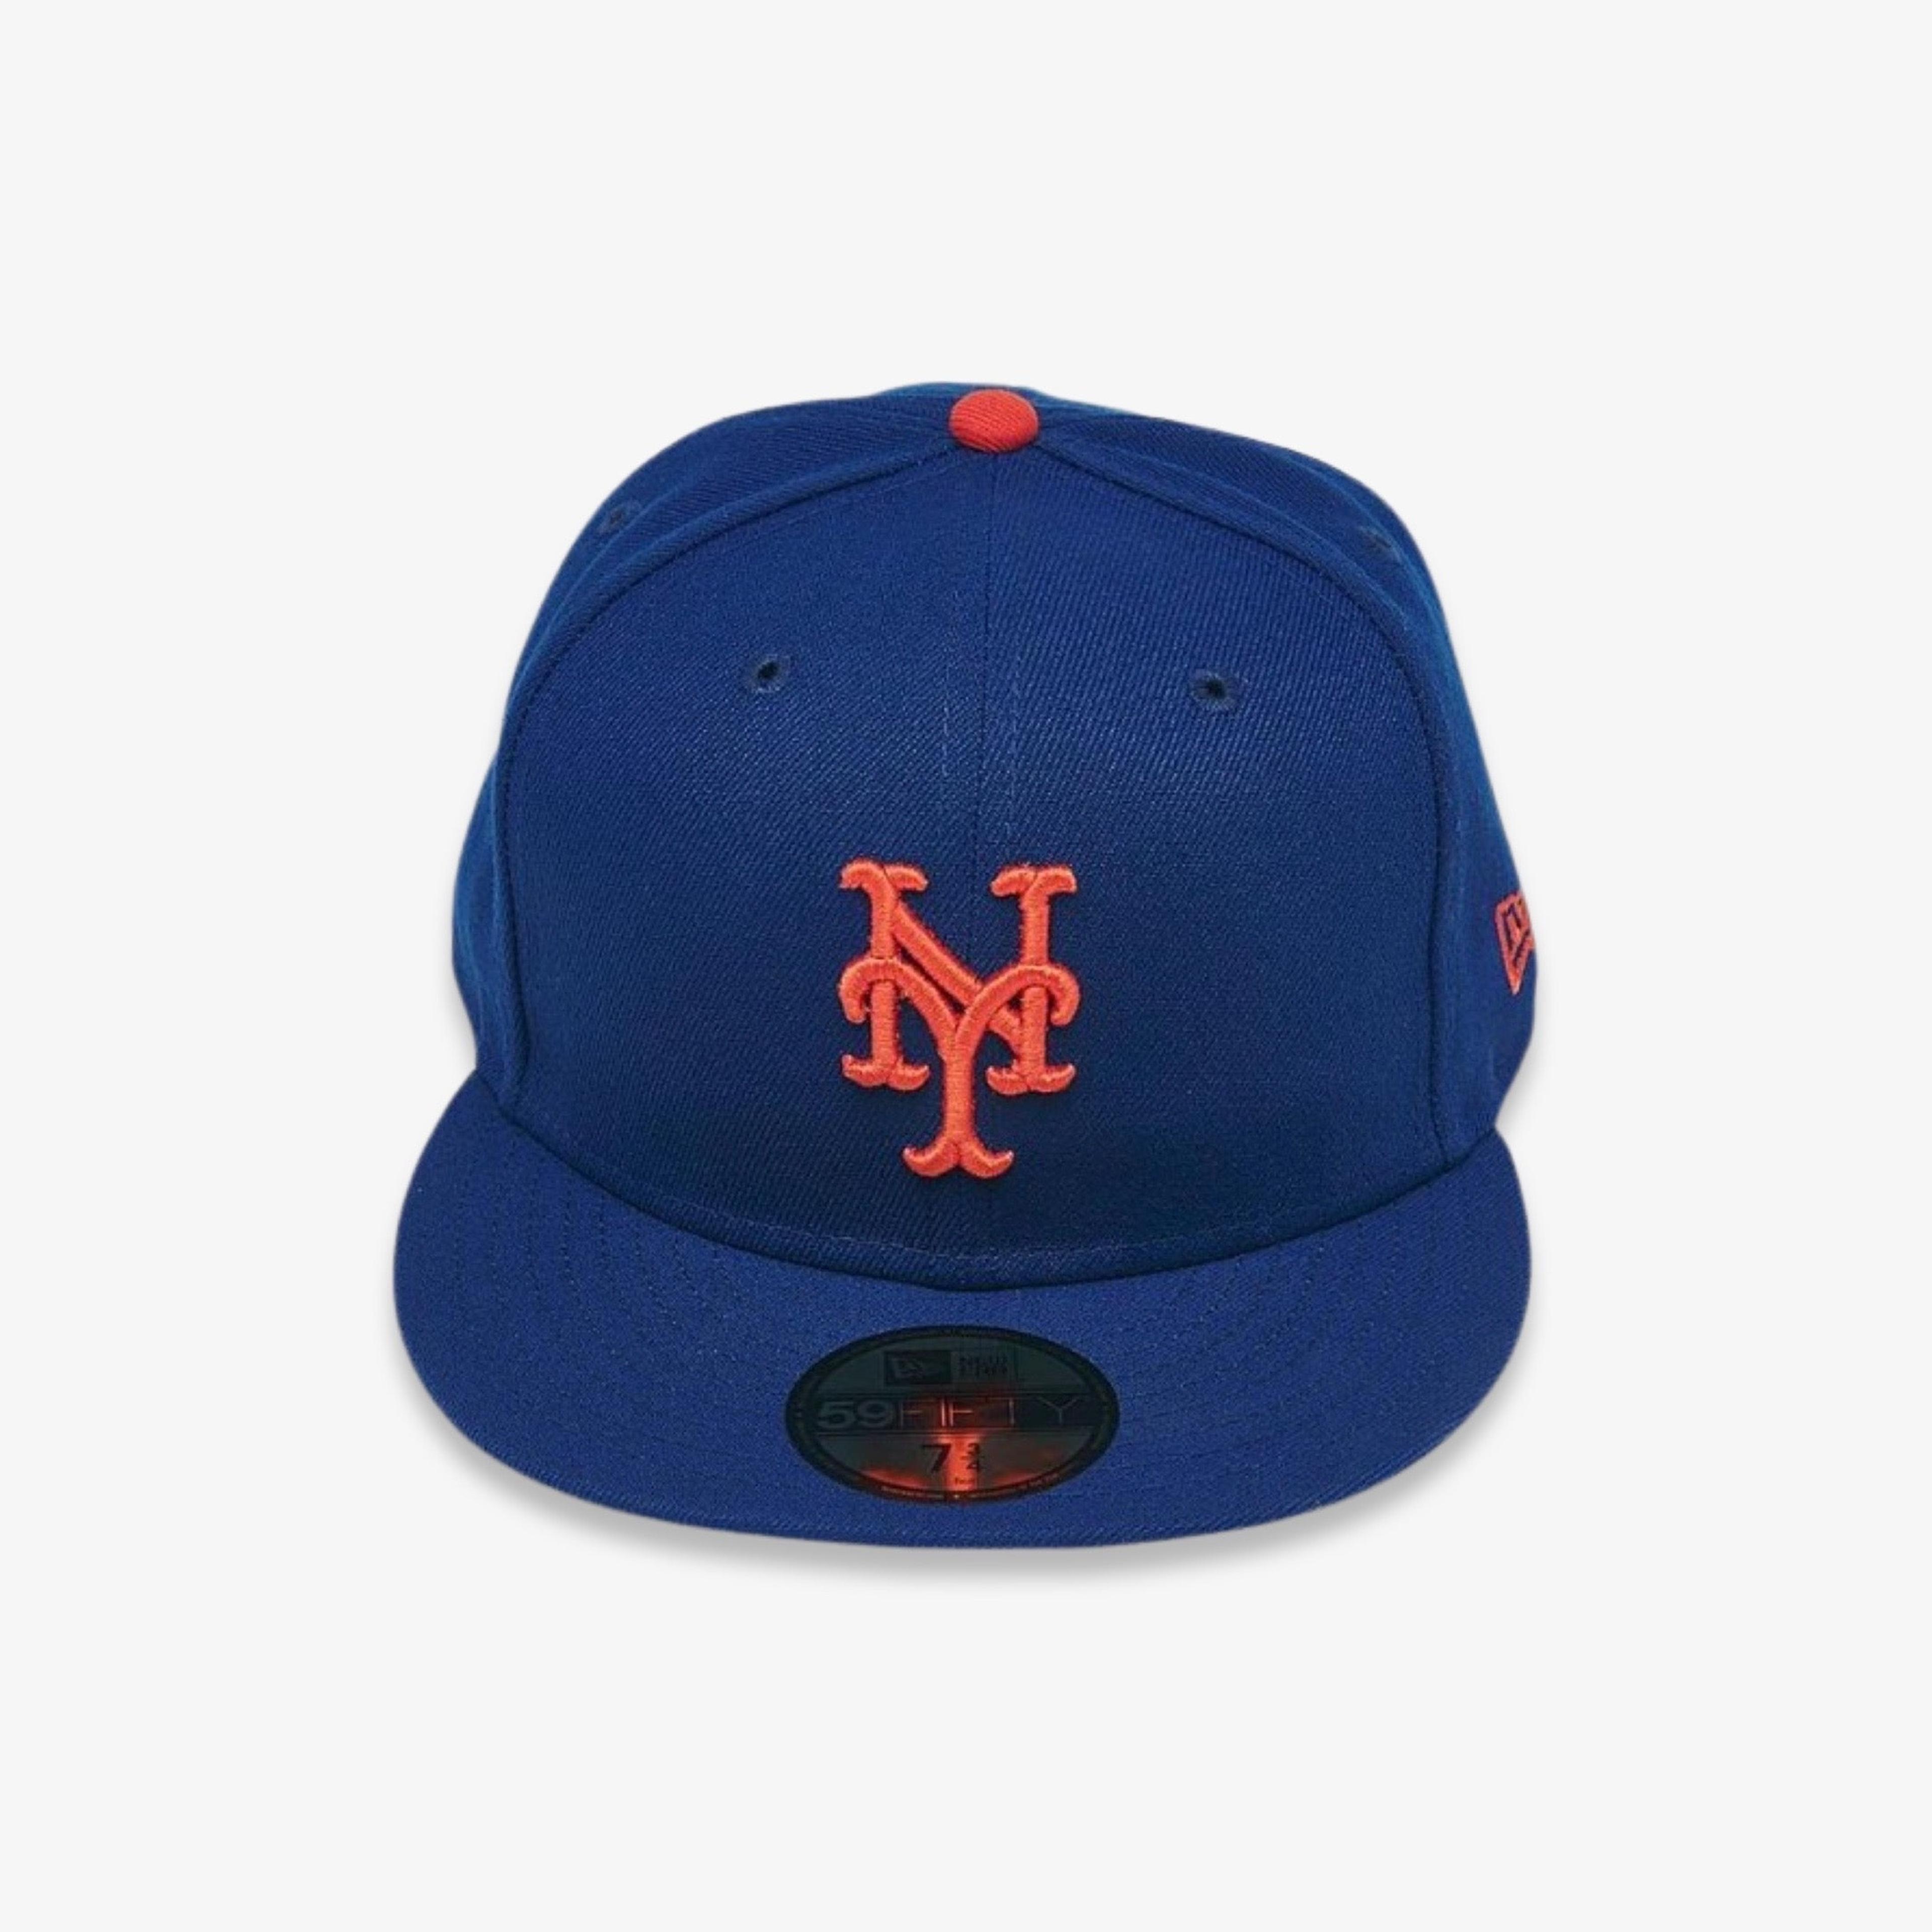 Alternate View 1 of New Era x MLB 'New York Mets' 59Fifty Patch Fitted Hat SS17